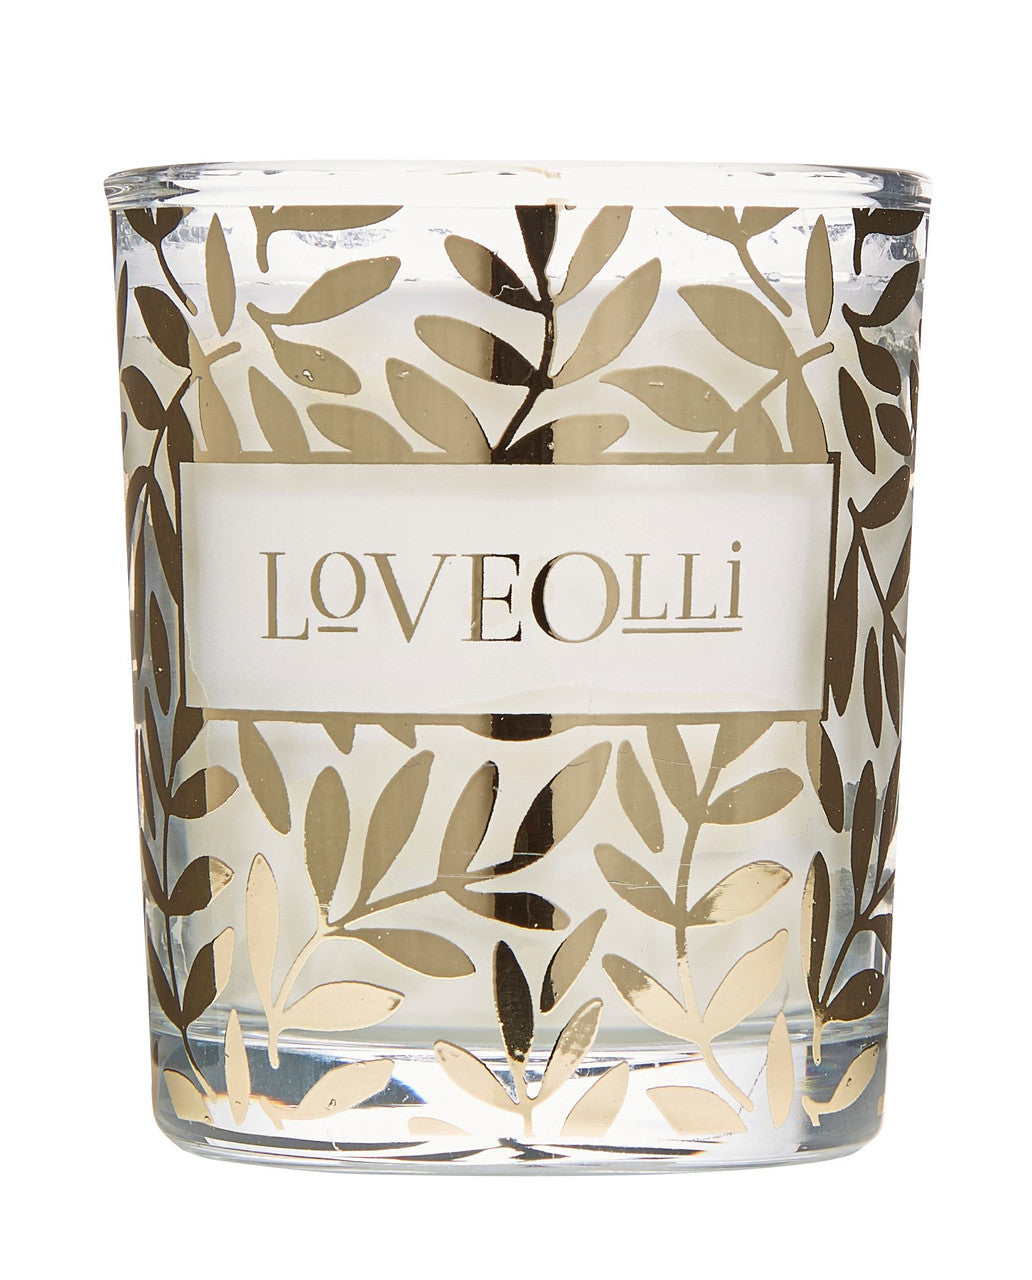 Love Olli Seaside Sundae scented votive candle. Hand poured in the UK.